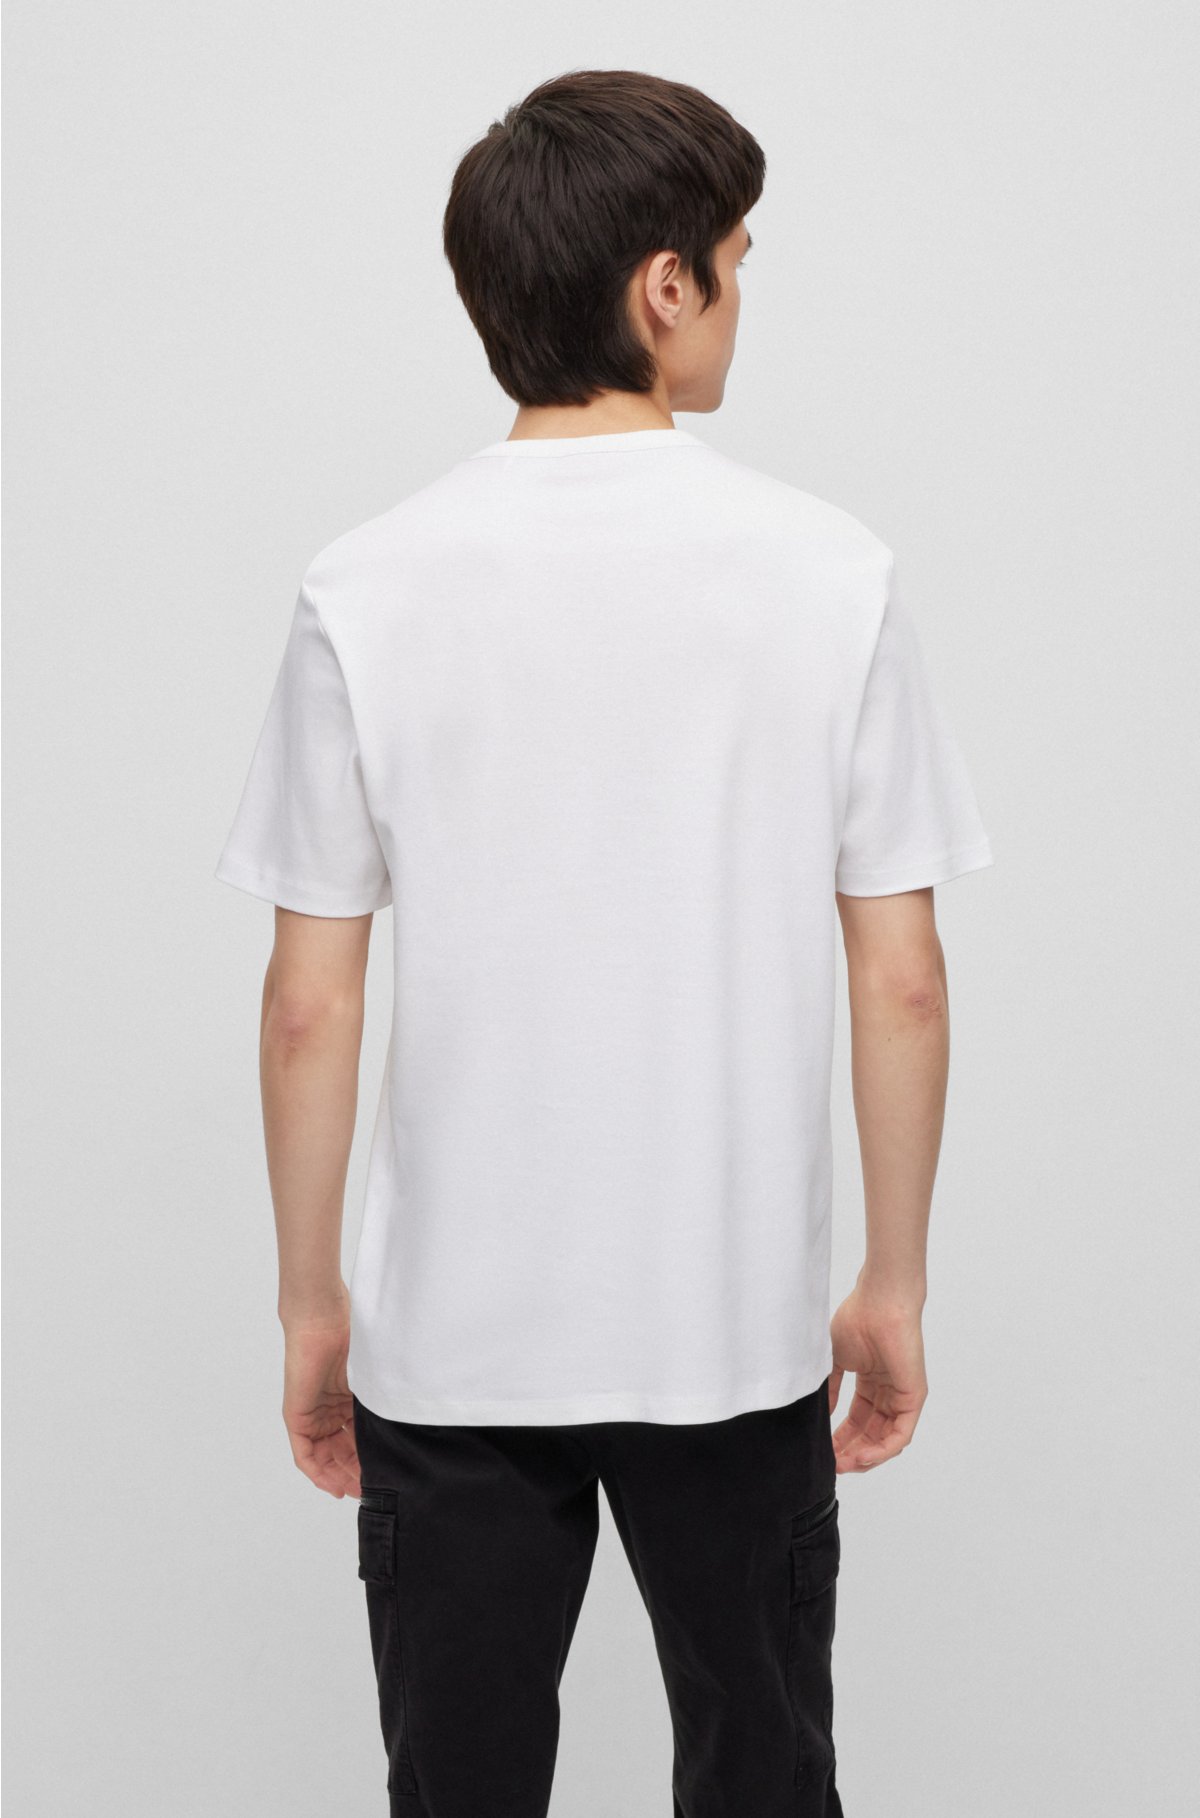 Pima-cotton regular-fit T-shirt with contrast logo, White